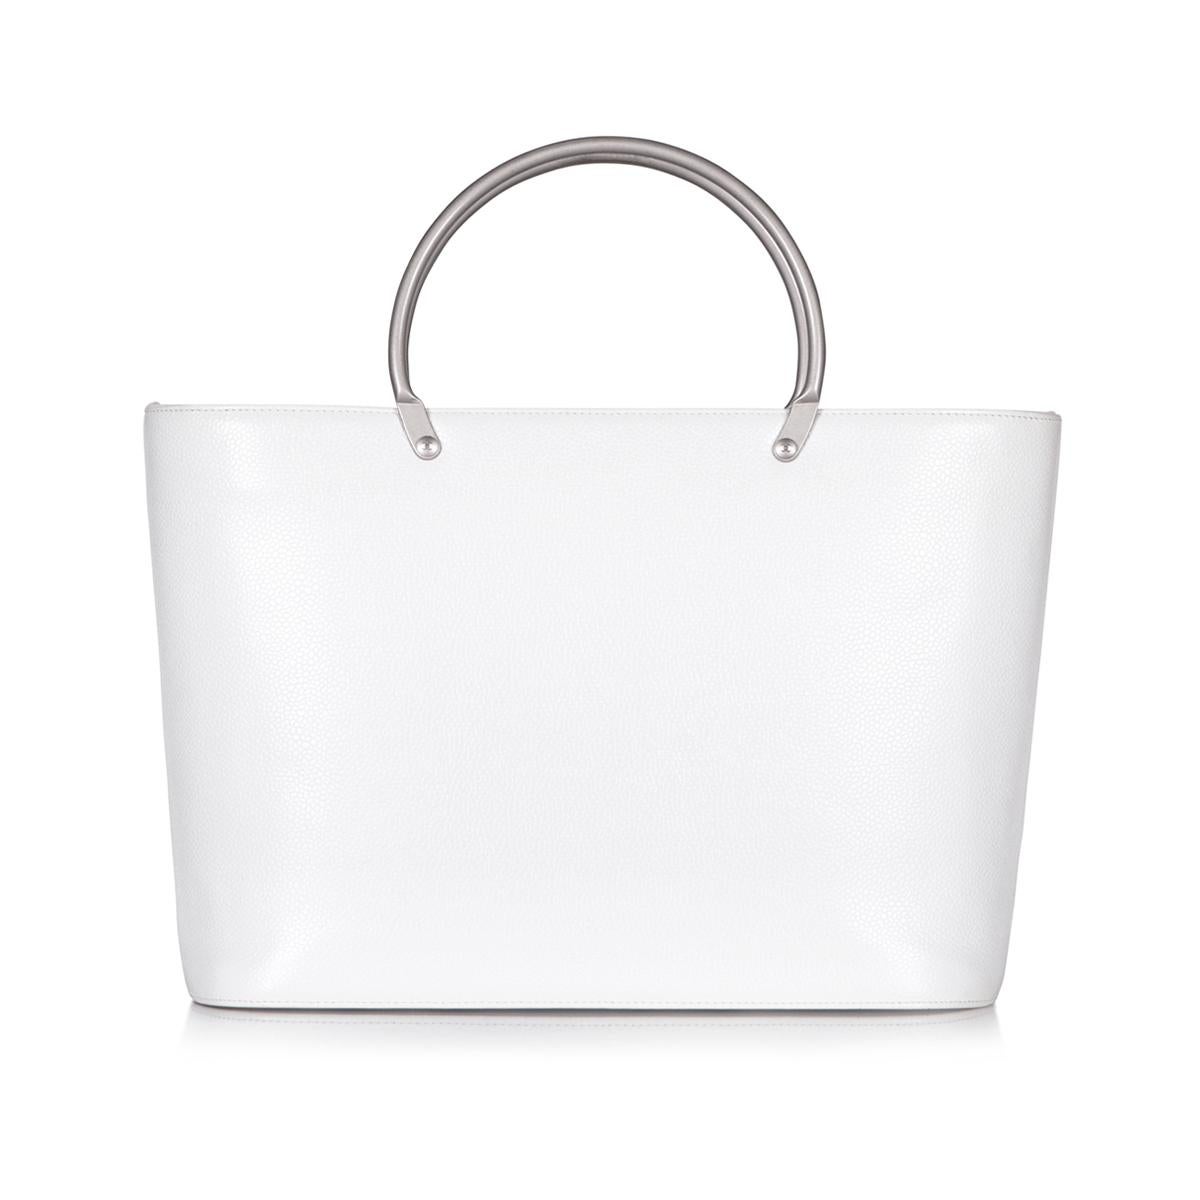 Chanel vintage white caviar leather top metal handle tote bag, made in France, 1990s.

Date of manufacture: 1999
Origin: France
Material: caviar leather, metal
Includes: serial/n
Dimensions: height 20 cm x width 28 cm x depth 8 cm
Condition: in very